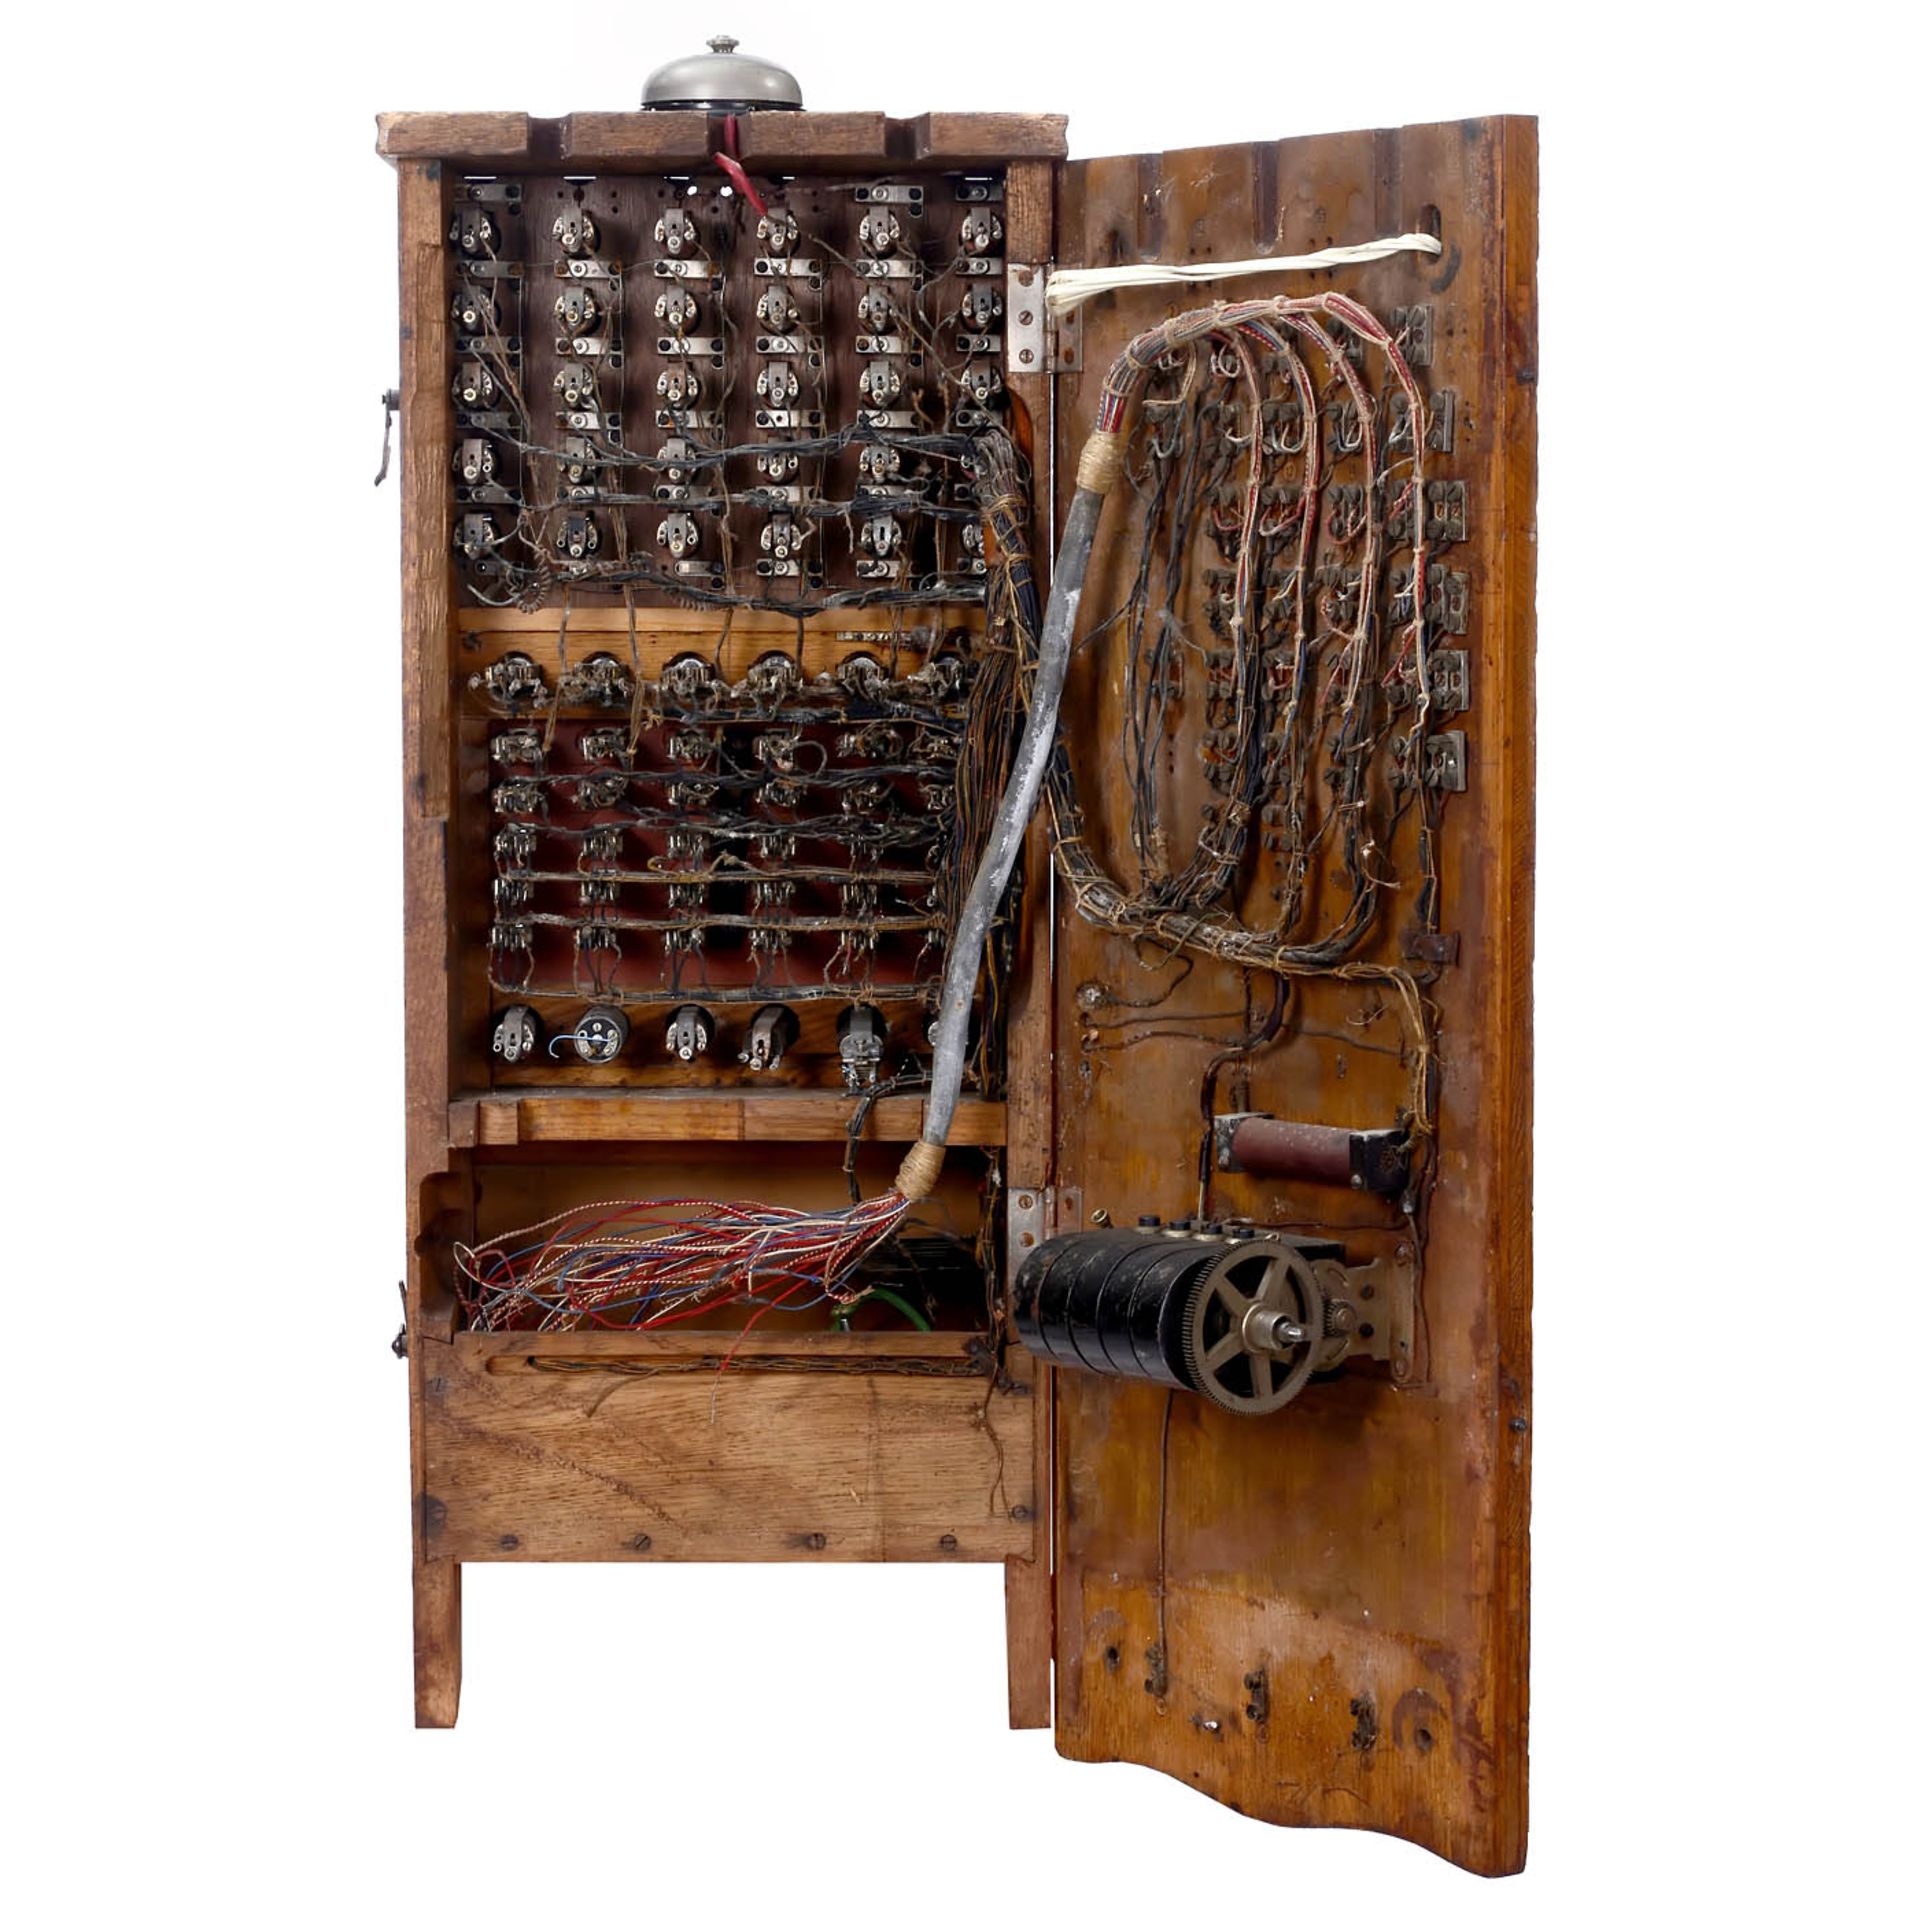 Large Switchboard by L.M. Ericsson for the Russian Market, c. 1895 - Image 2 of 2